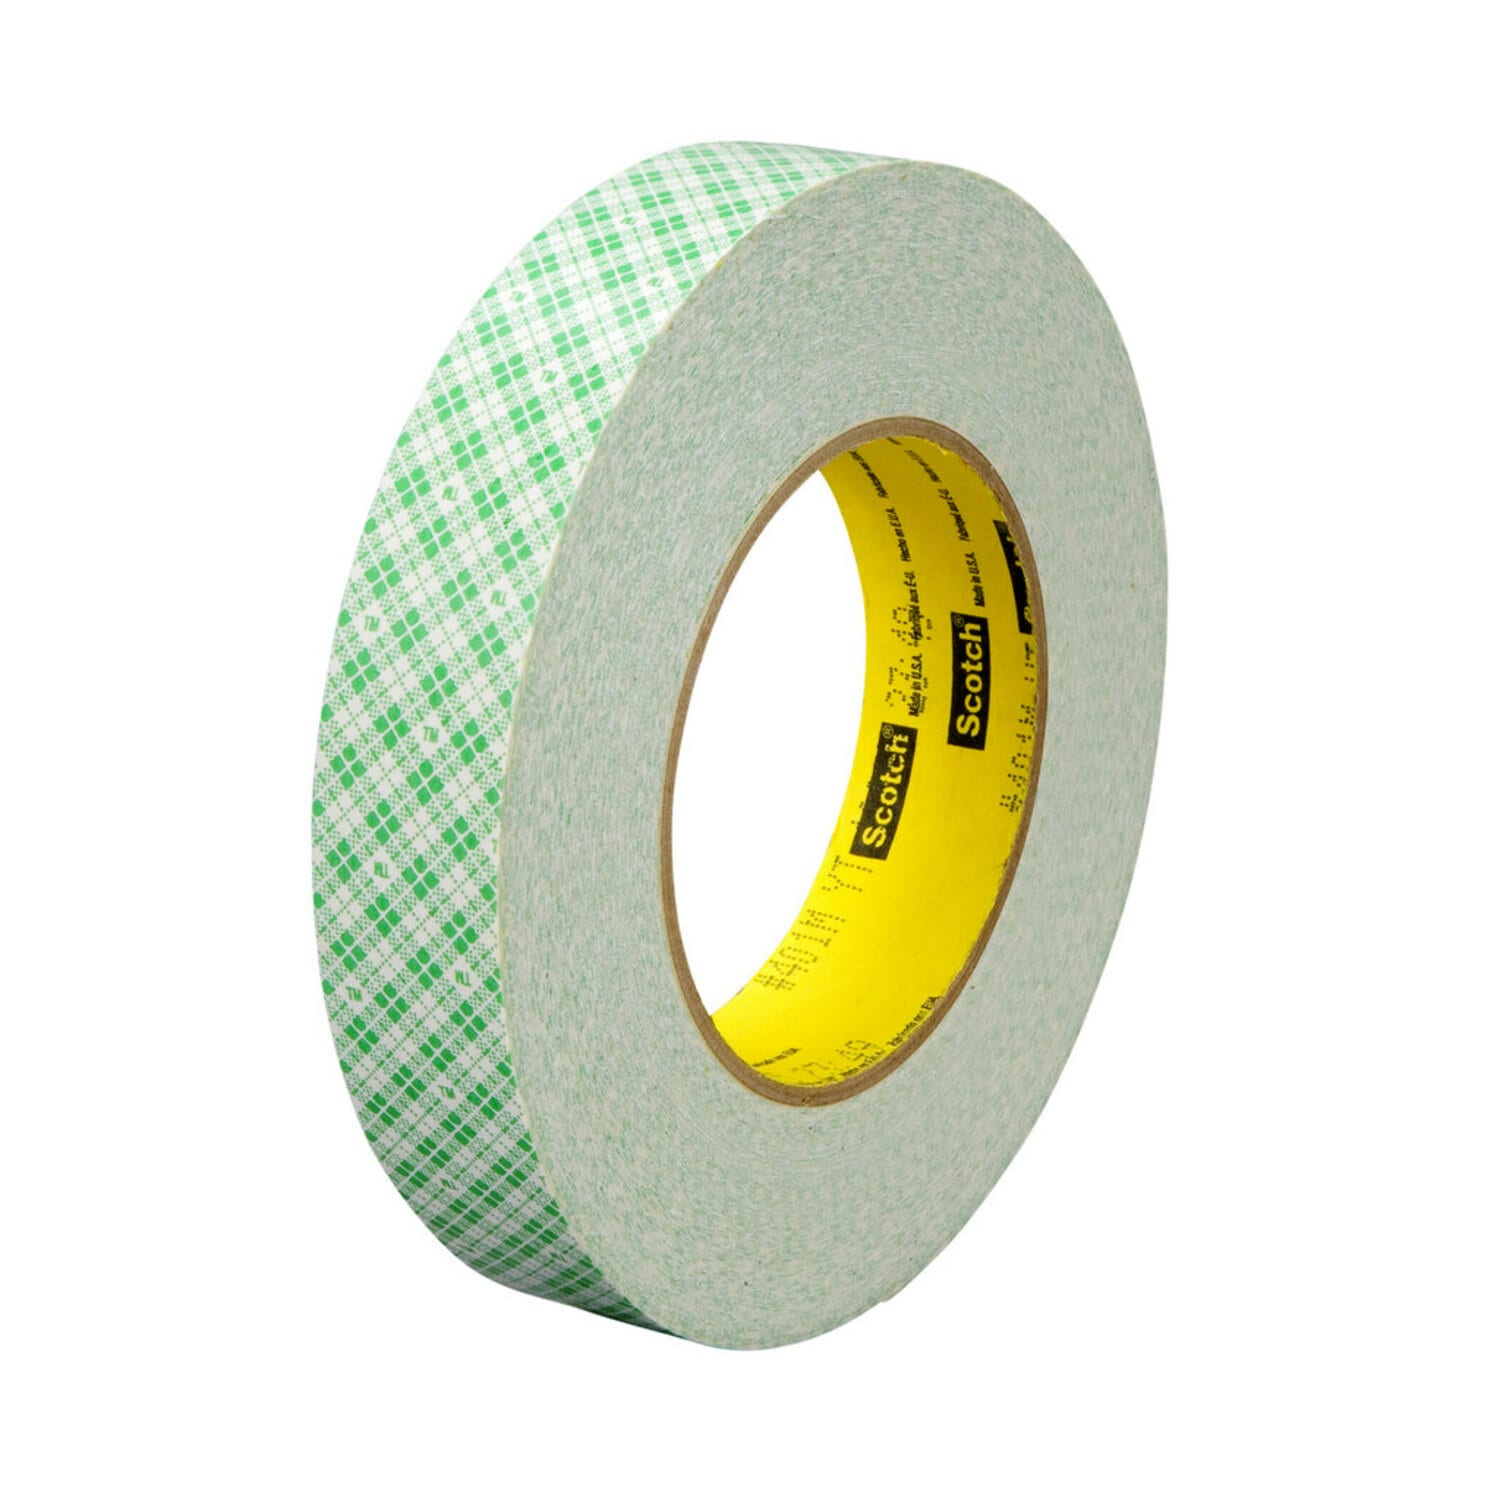 7010375444 - 3M Double Coated Paper Tape 401M, Natural, 3 in x 36 yd, 9 mil, 12
rolls per case